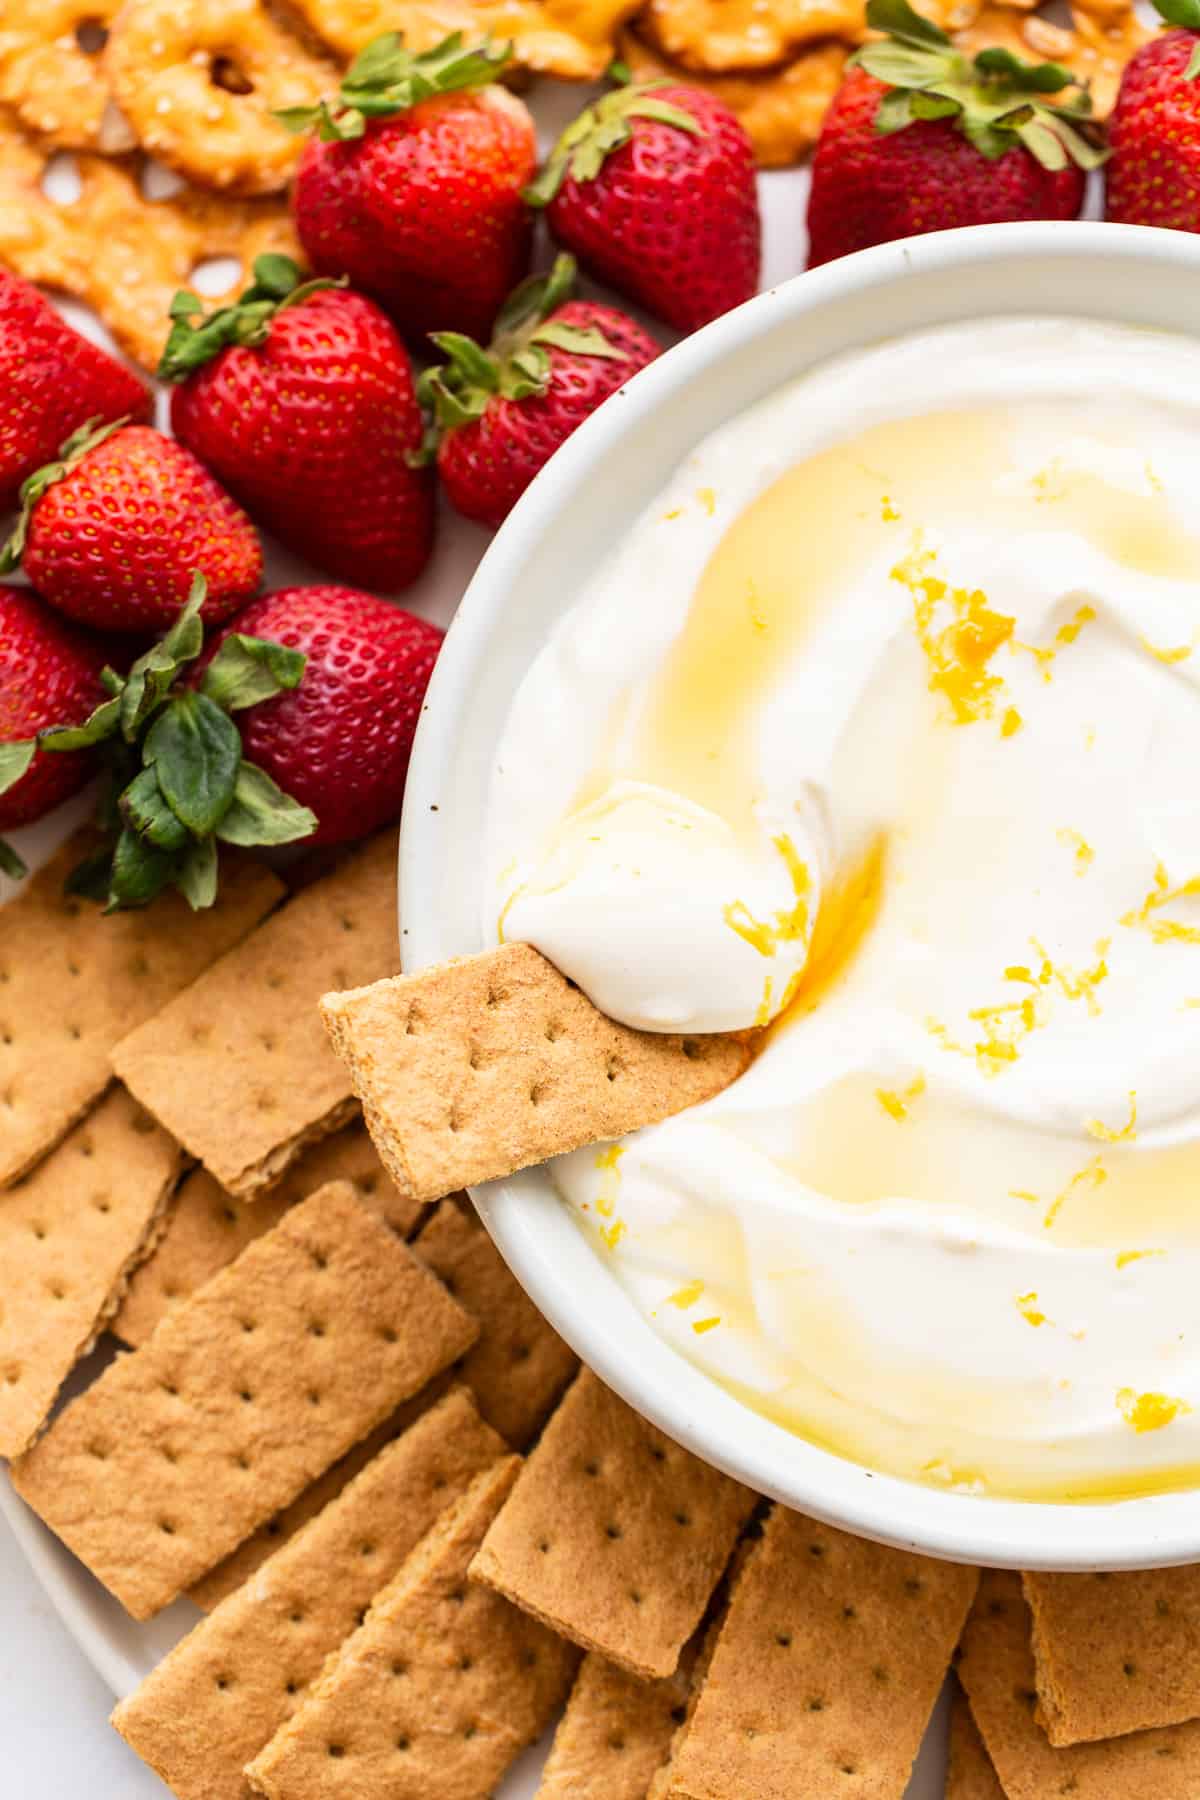 Fruit dip surrounded by strawberries and graham crackers.